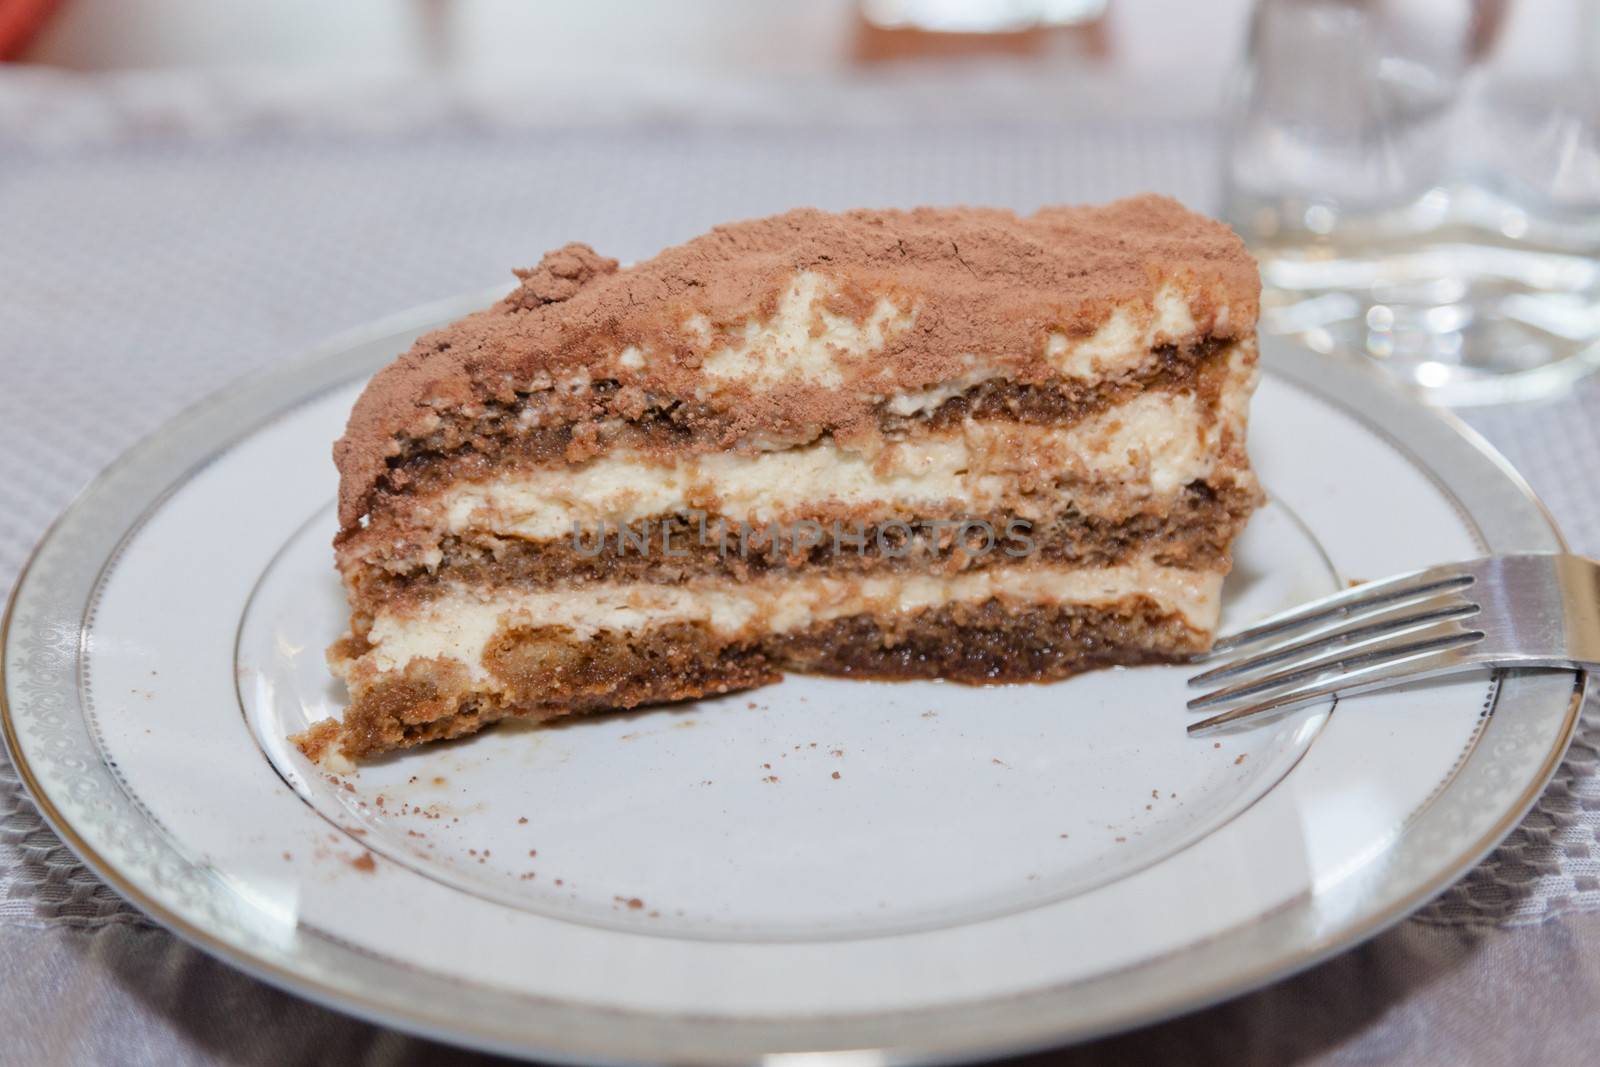 Tiramisu is made of biscuits dipped in coffee, layered with a whipped mixture of egg yolks and mascarpone, and flavored with liquor and cocoa.